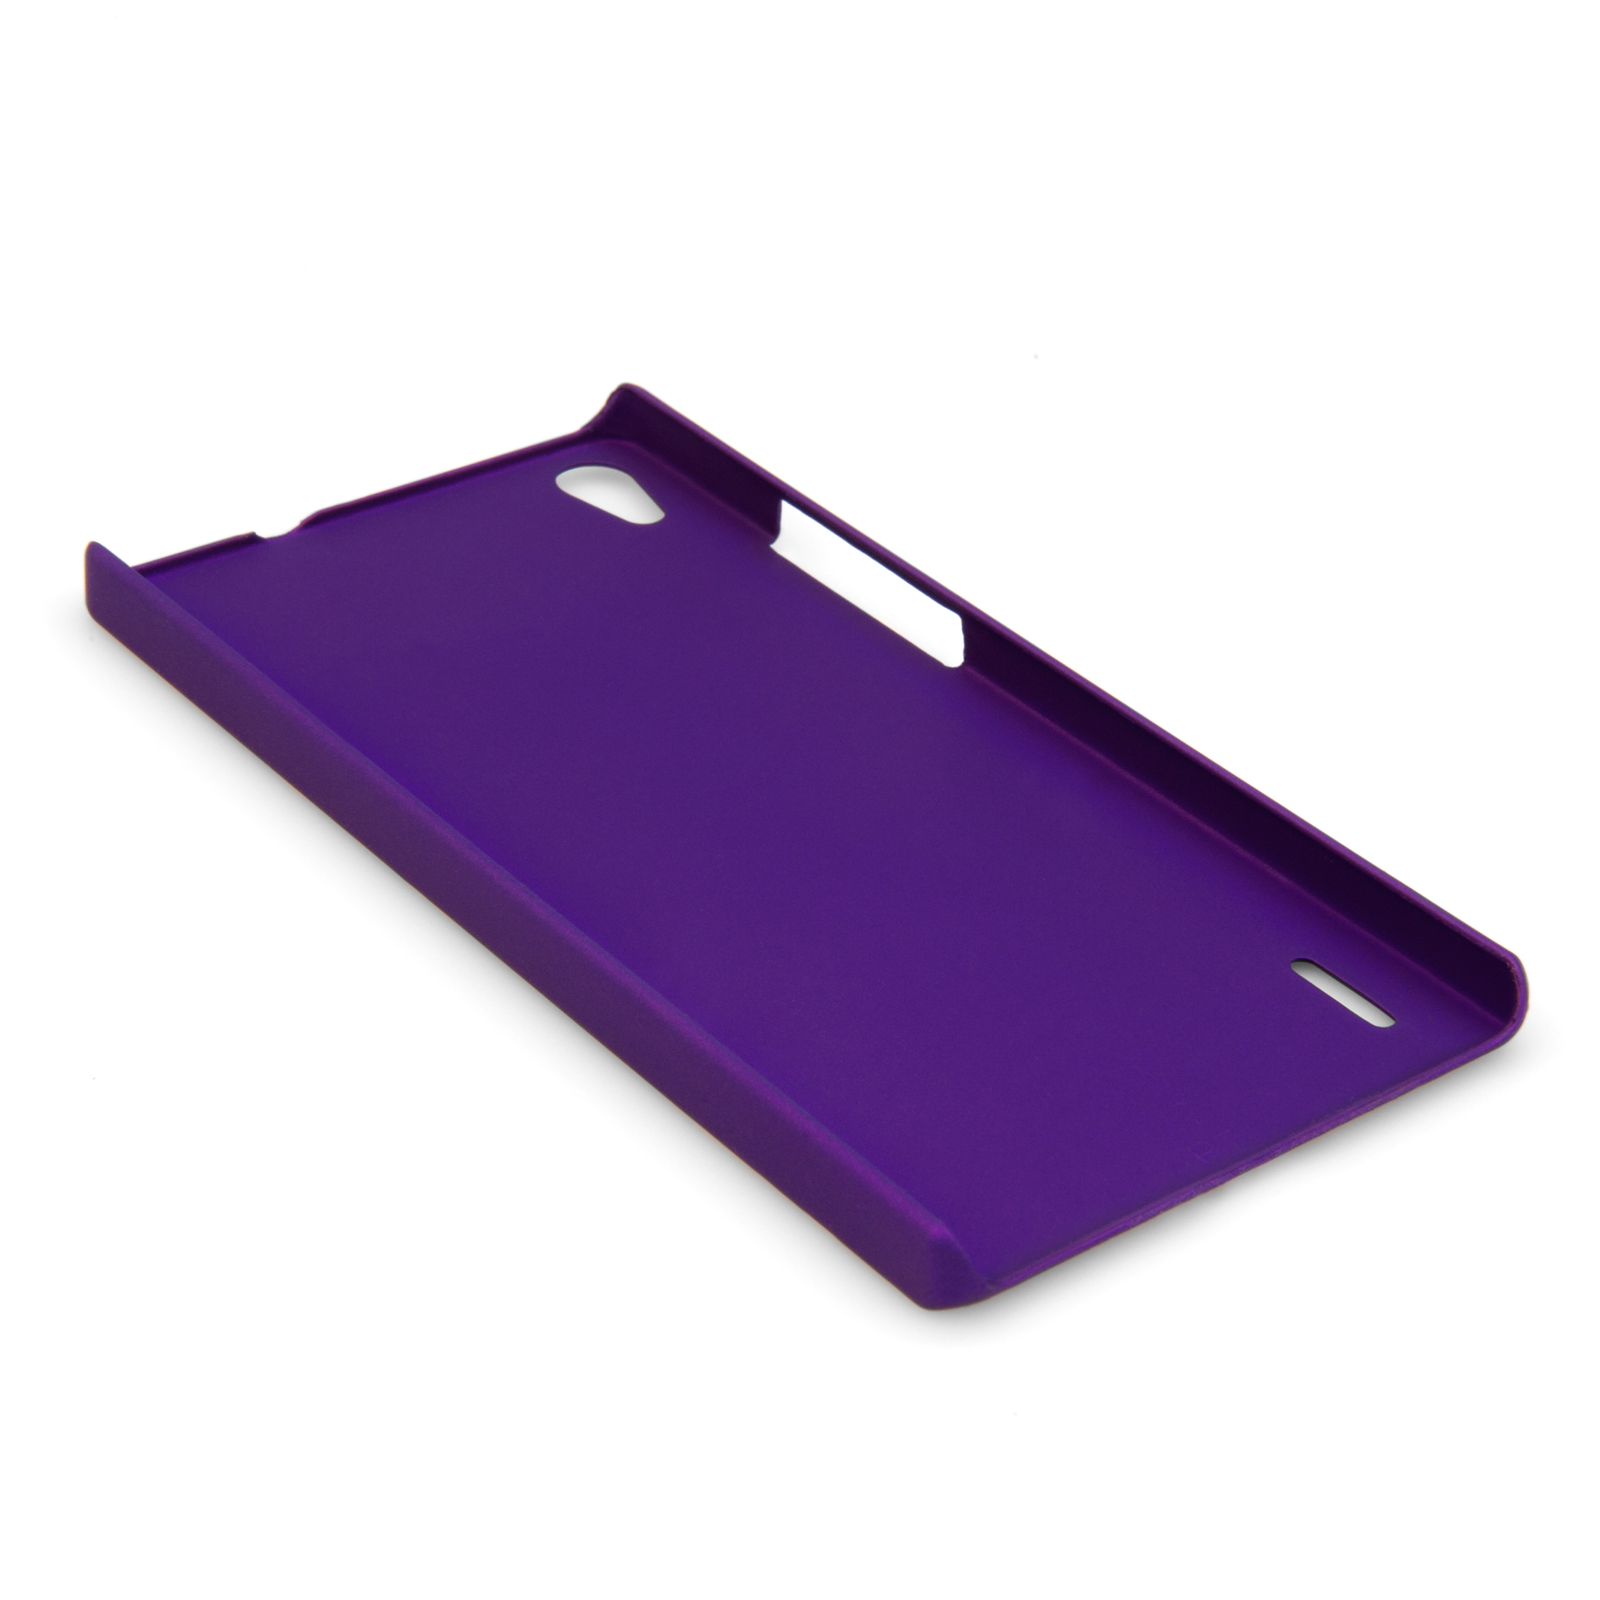 YouSave Accessories Huawei Ascend P7 Hard Hybrid Case - Purple